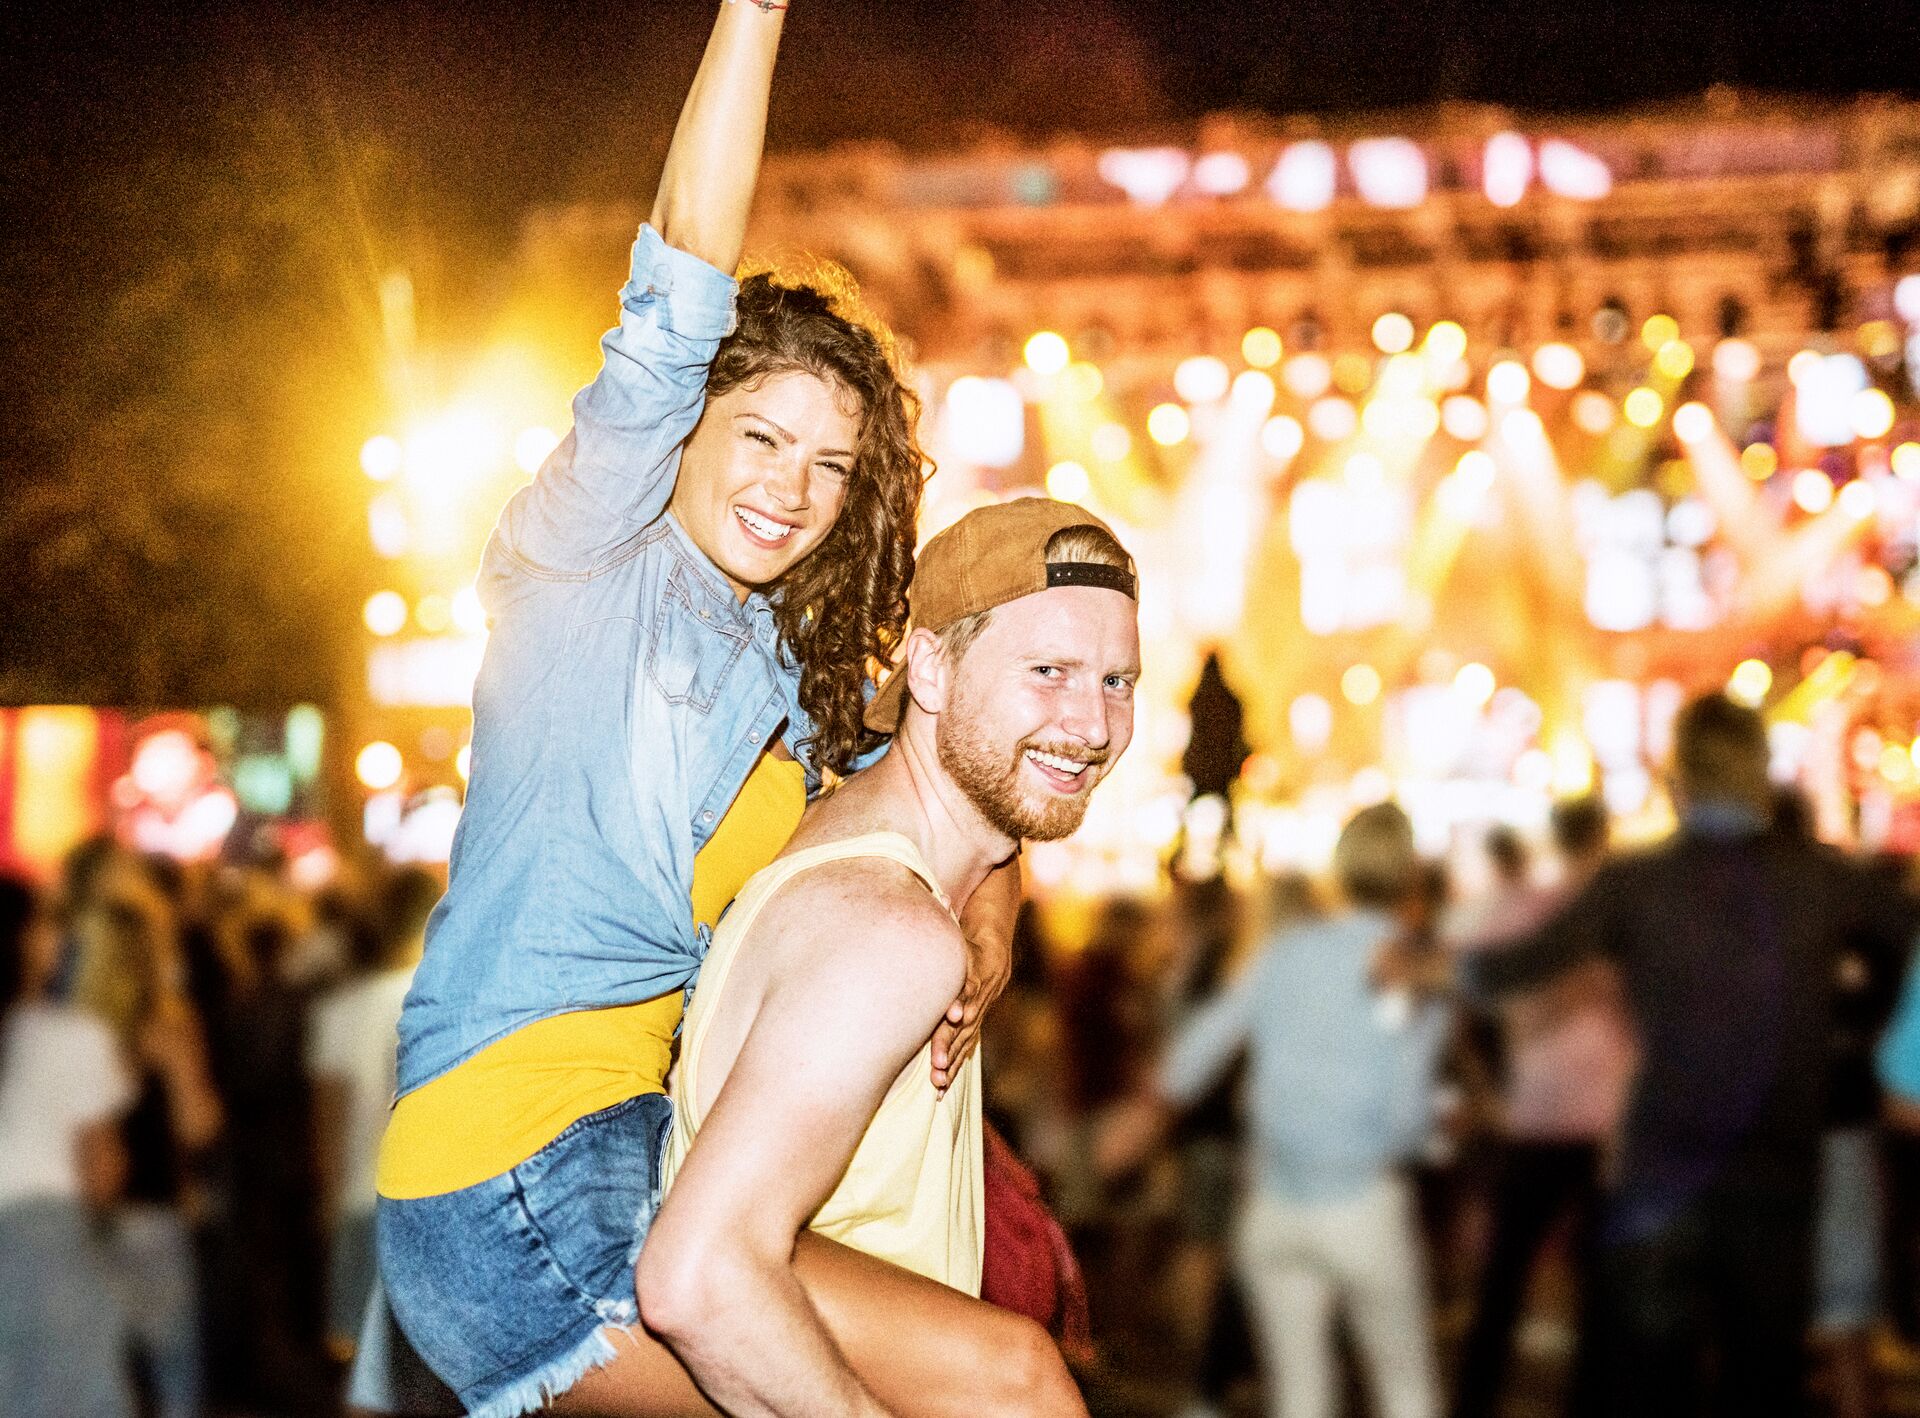 Large_MS PPT_Web-A happy young man with a hat giving his female friend a piggyback ride while smiling at the camera at a music festival at night.jpg